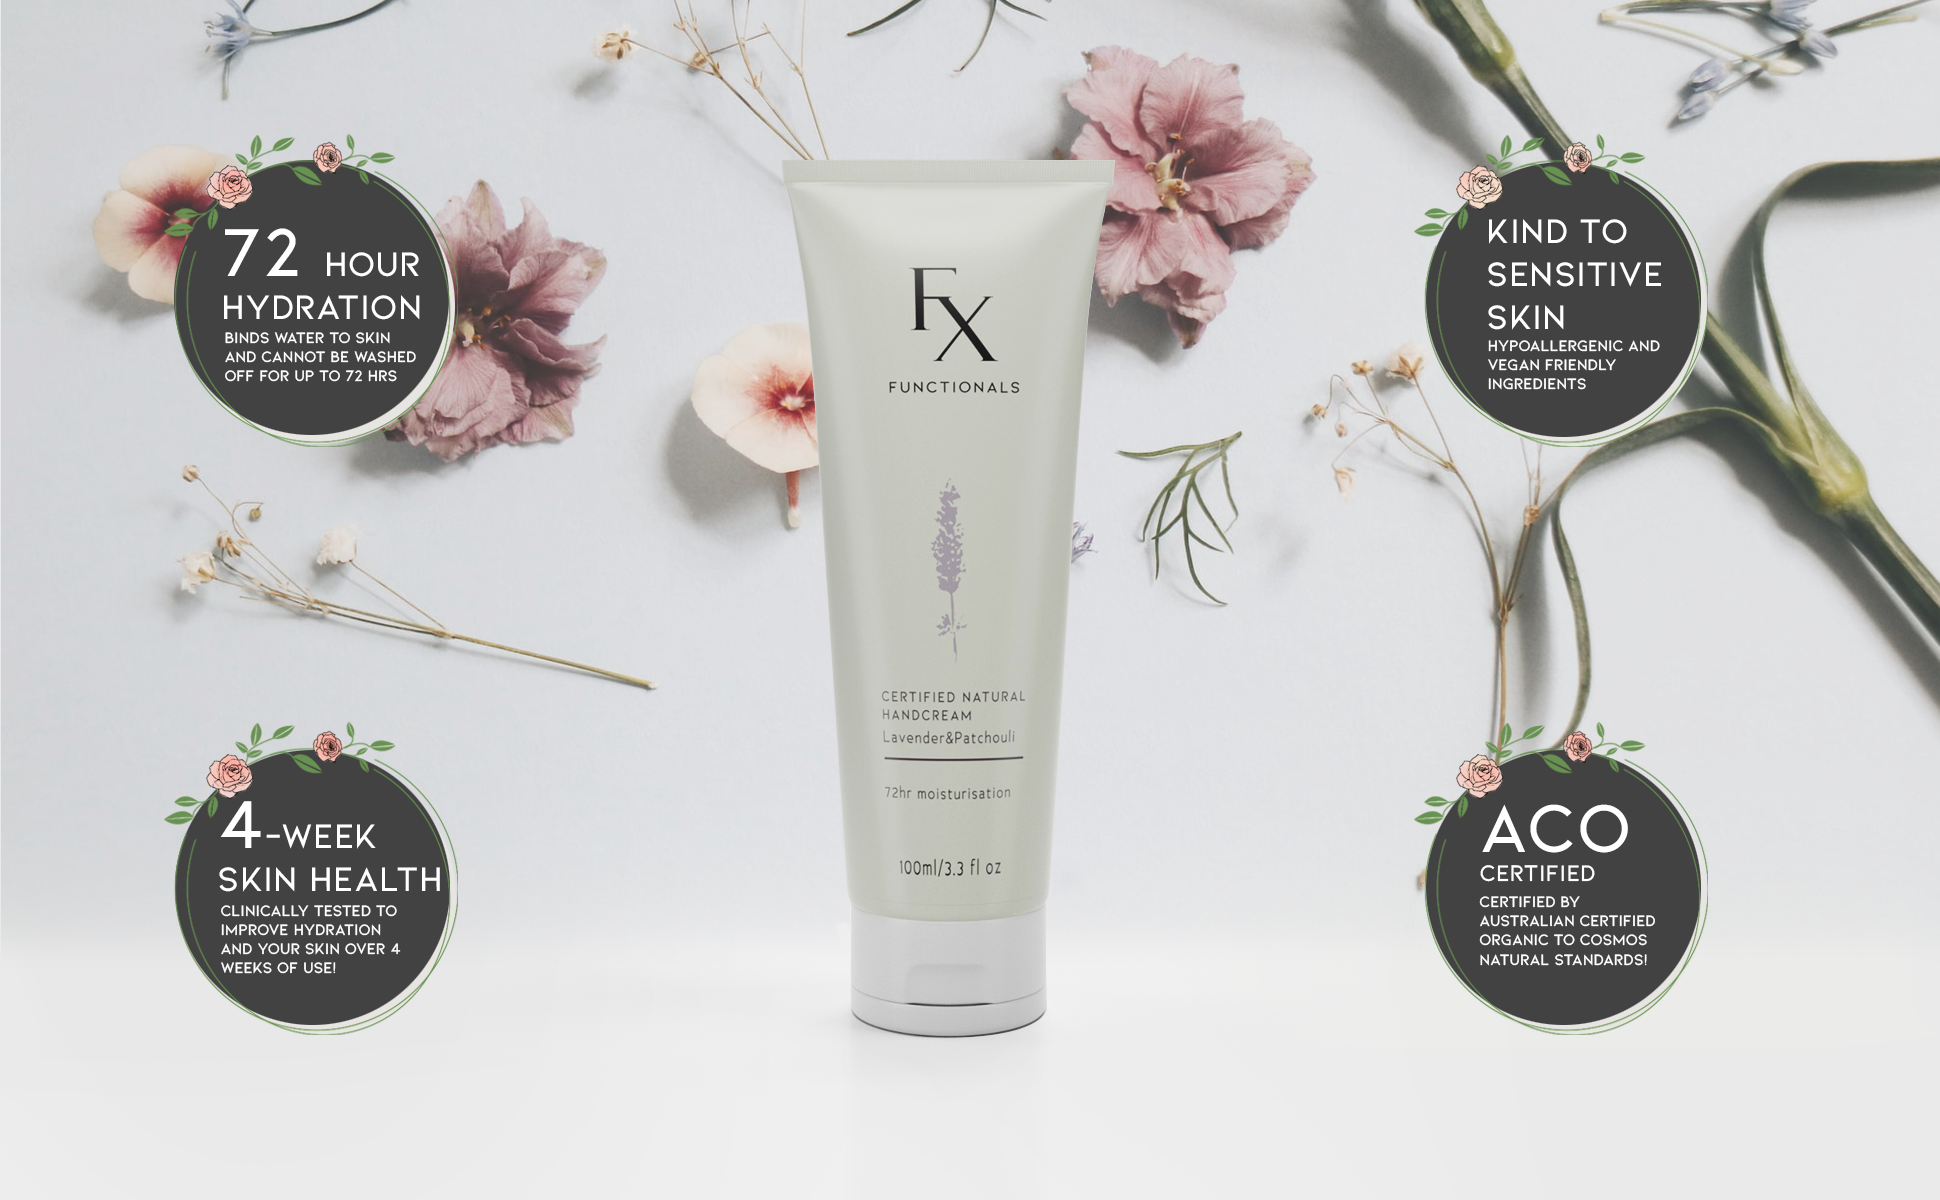 Handcream bottle on background with flowers showing four benefits: Certified by Australian Certified Organic, gentle on sensitive skin and 72 hour deep hydration